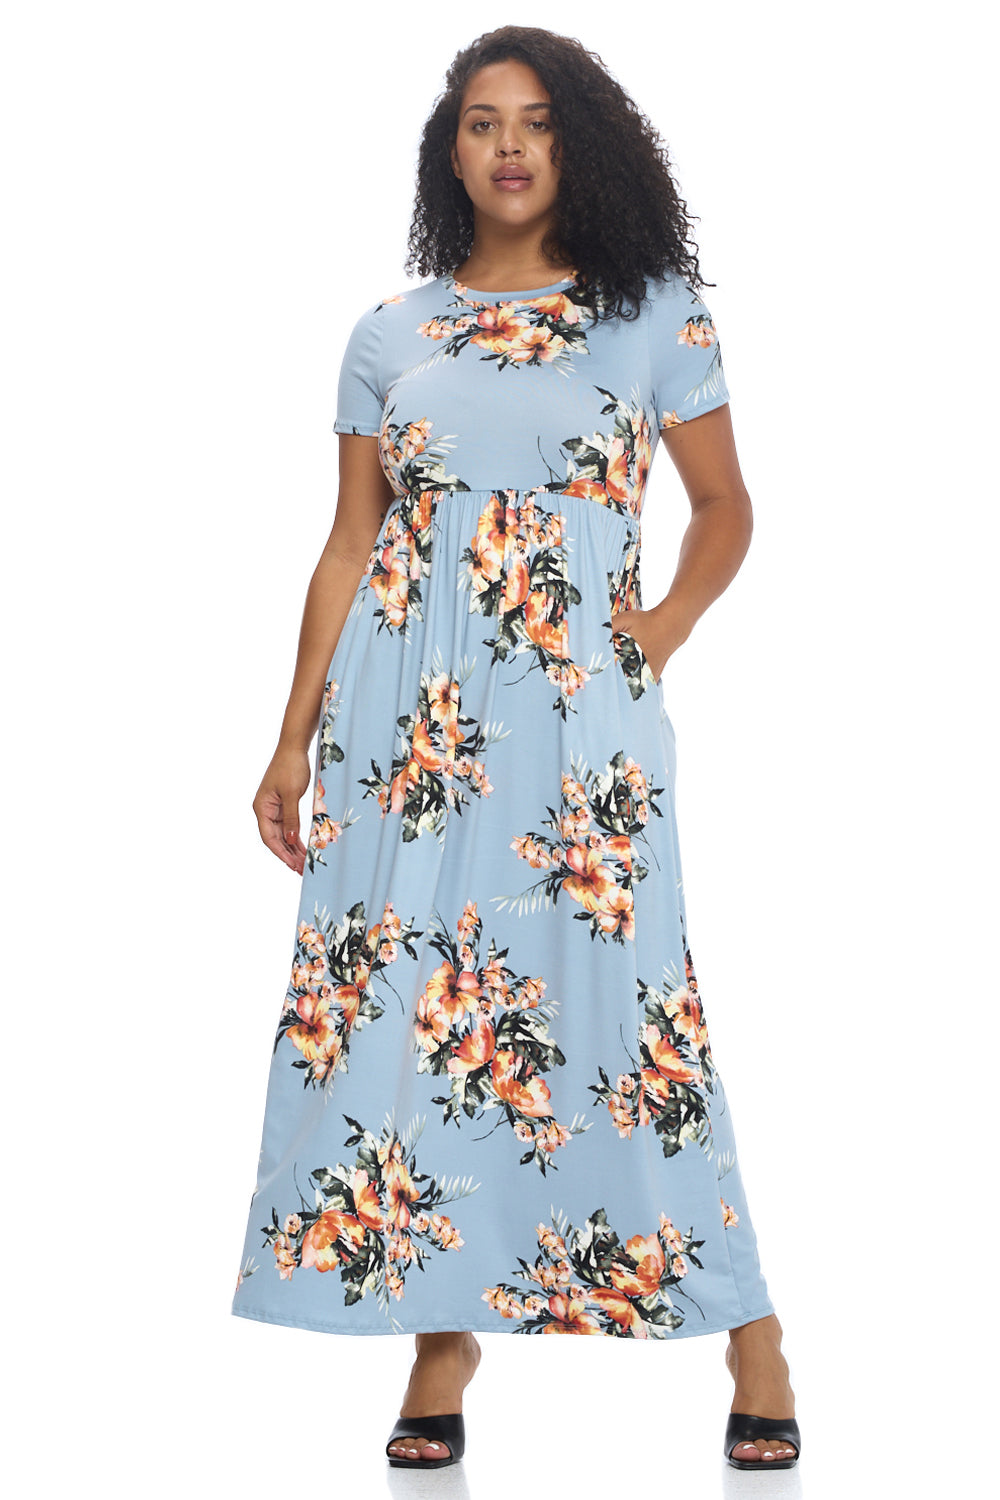 Short Sleeve Maxi Dress with Pockets Plus Size Floral – The Apparel Bar